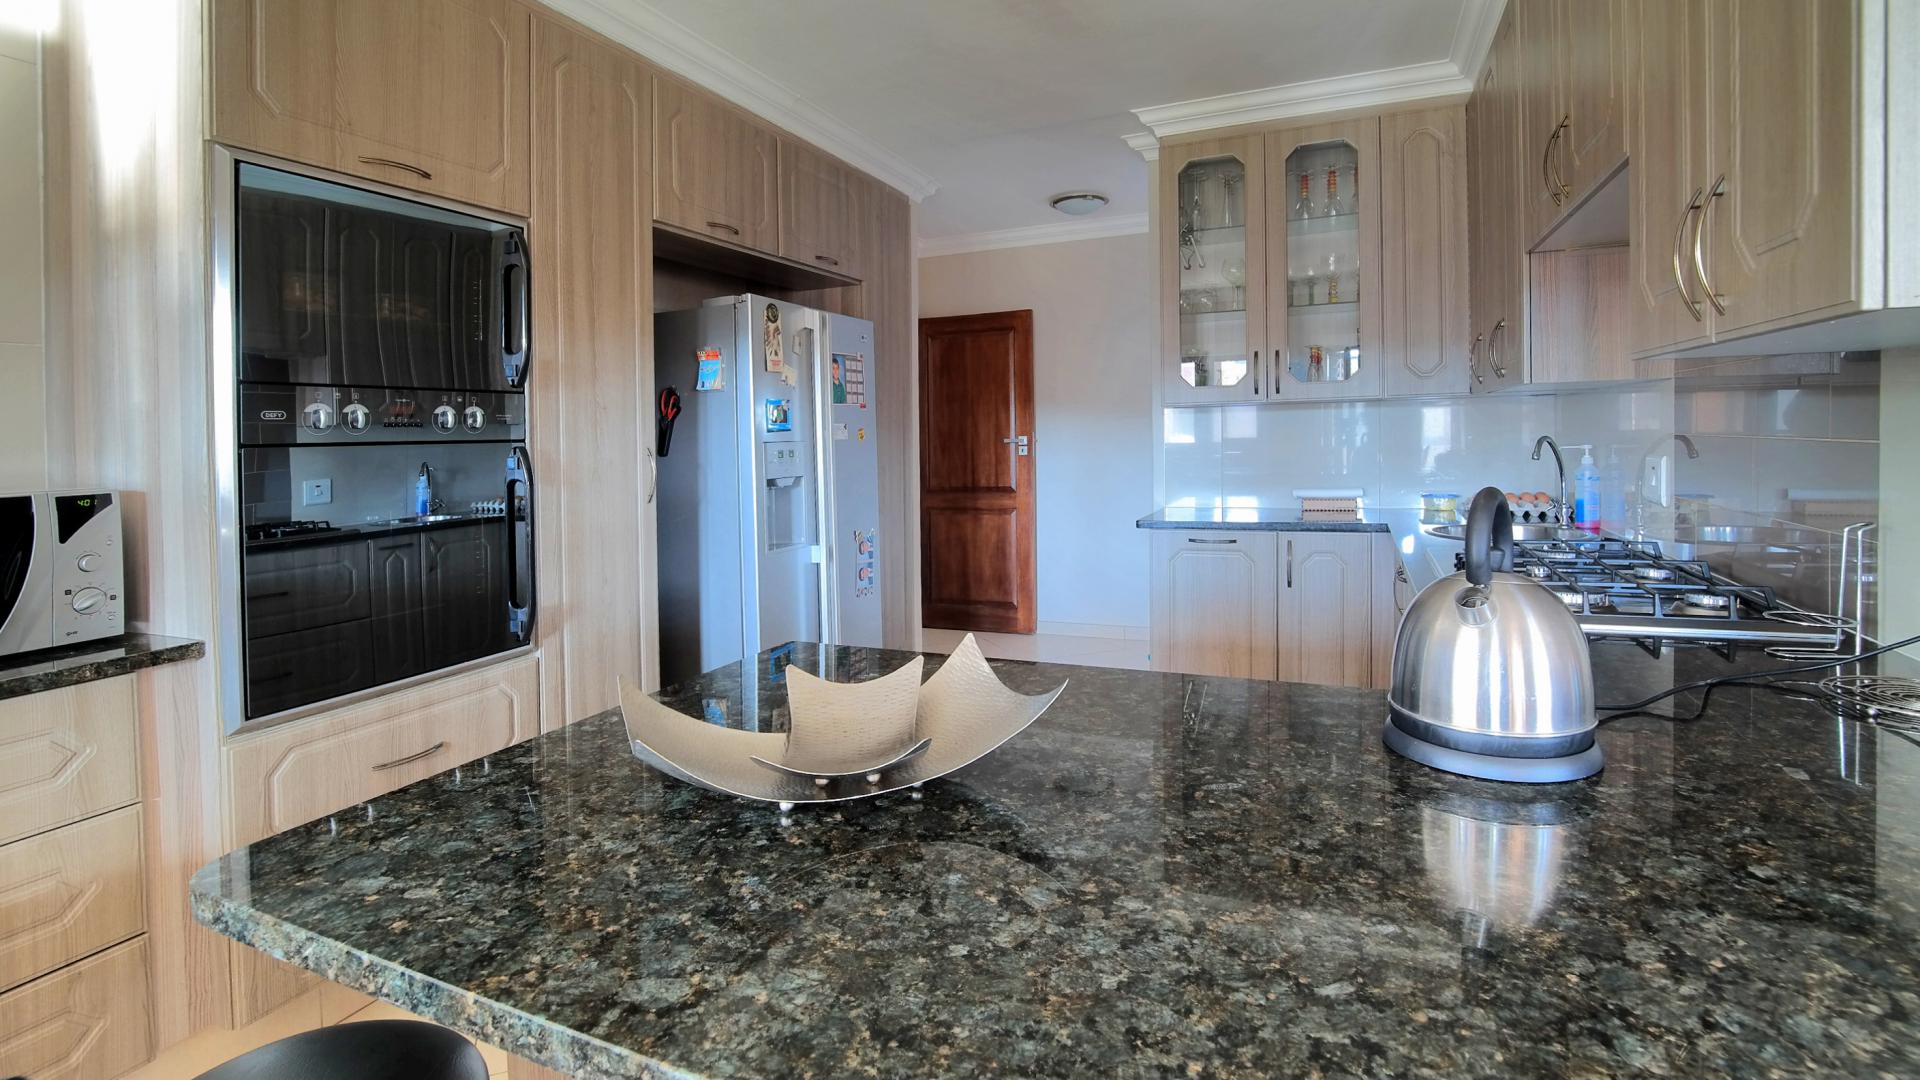 Kitchen - 15 square meters of property in The Wilds Estate